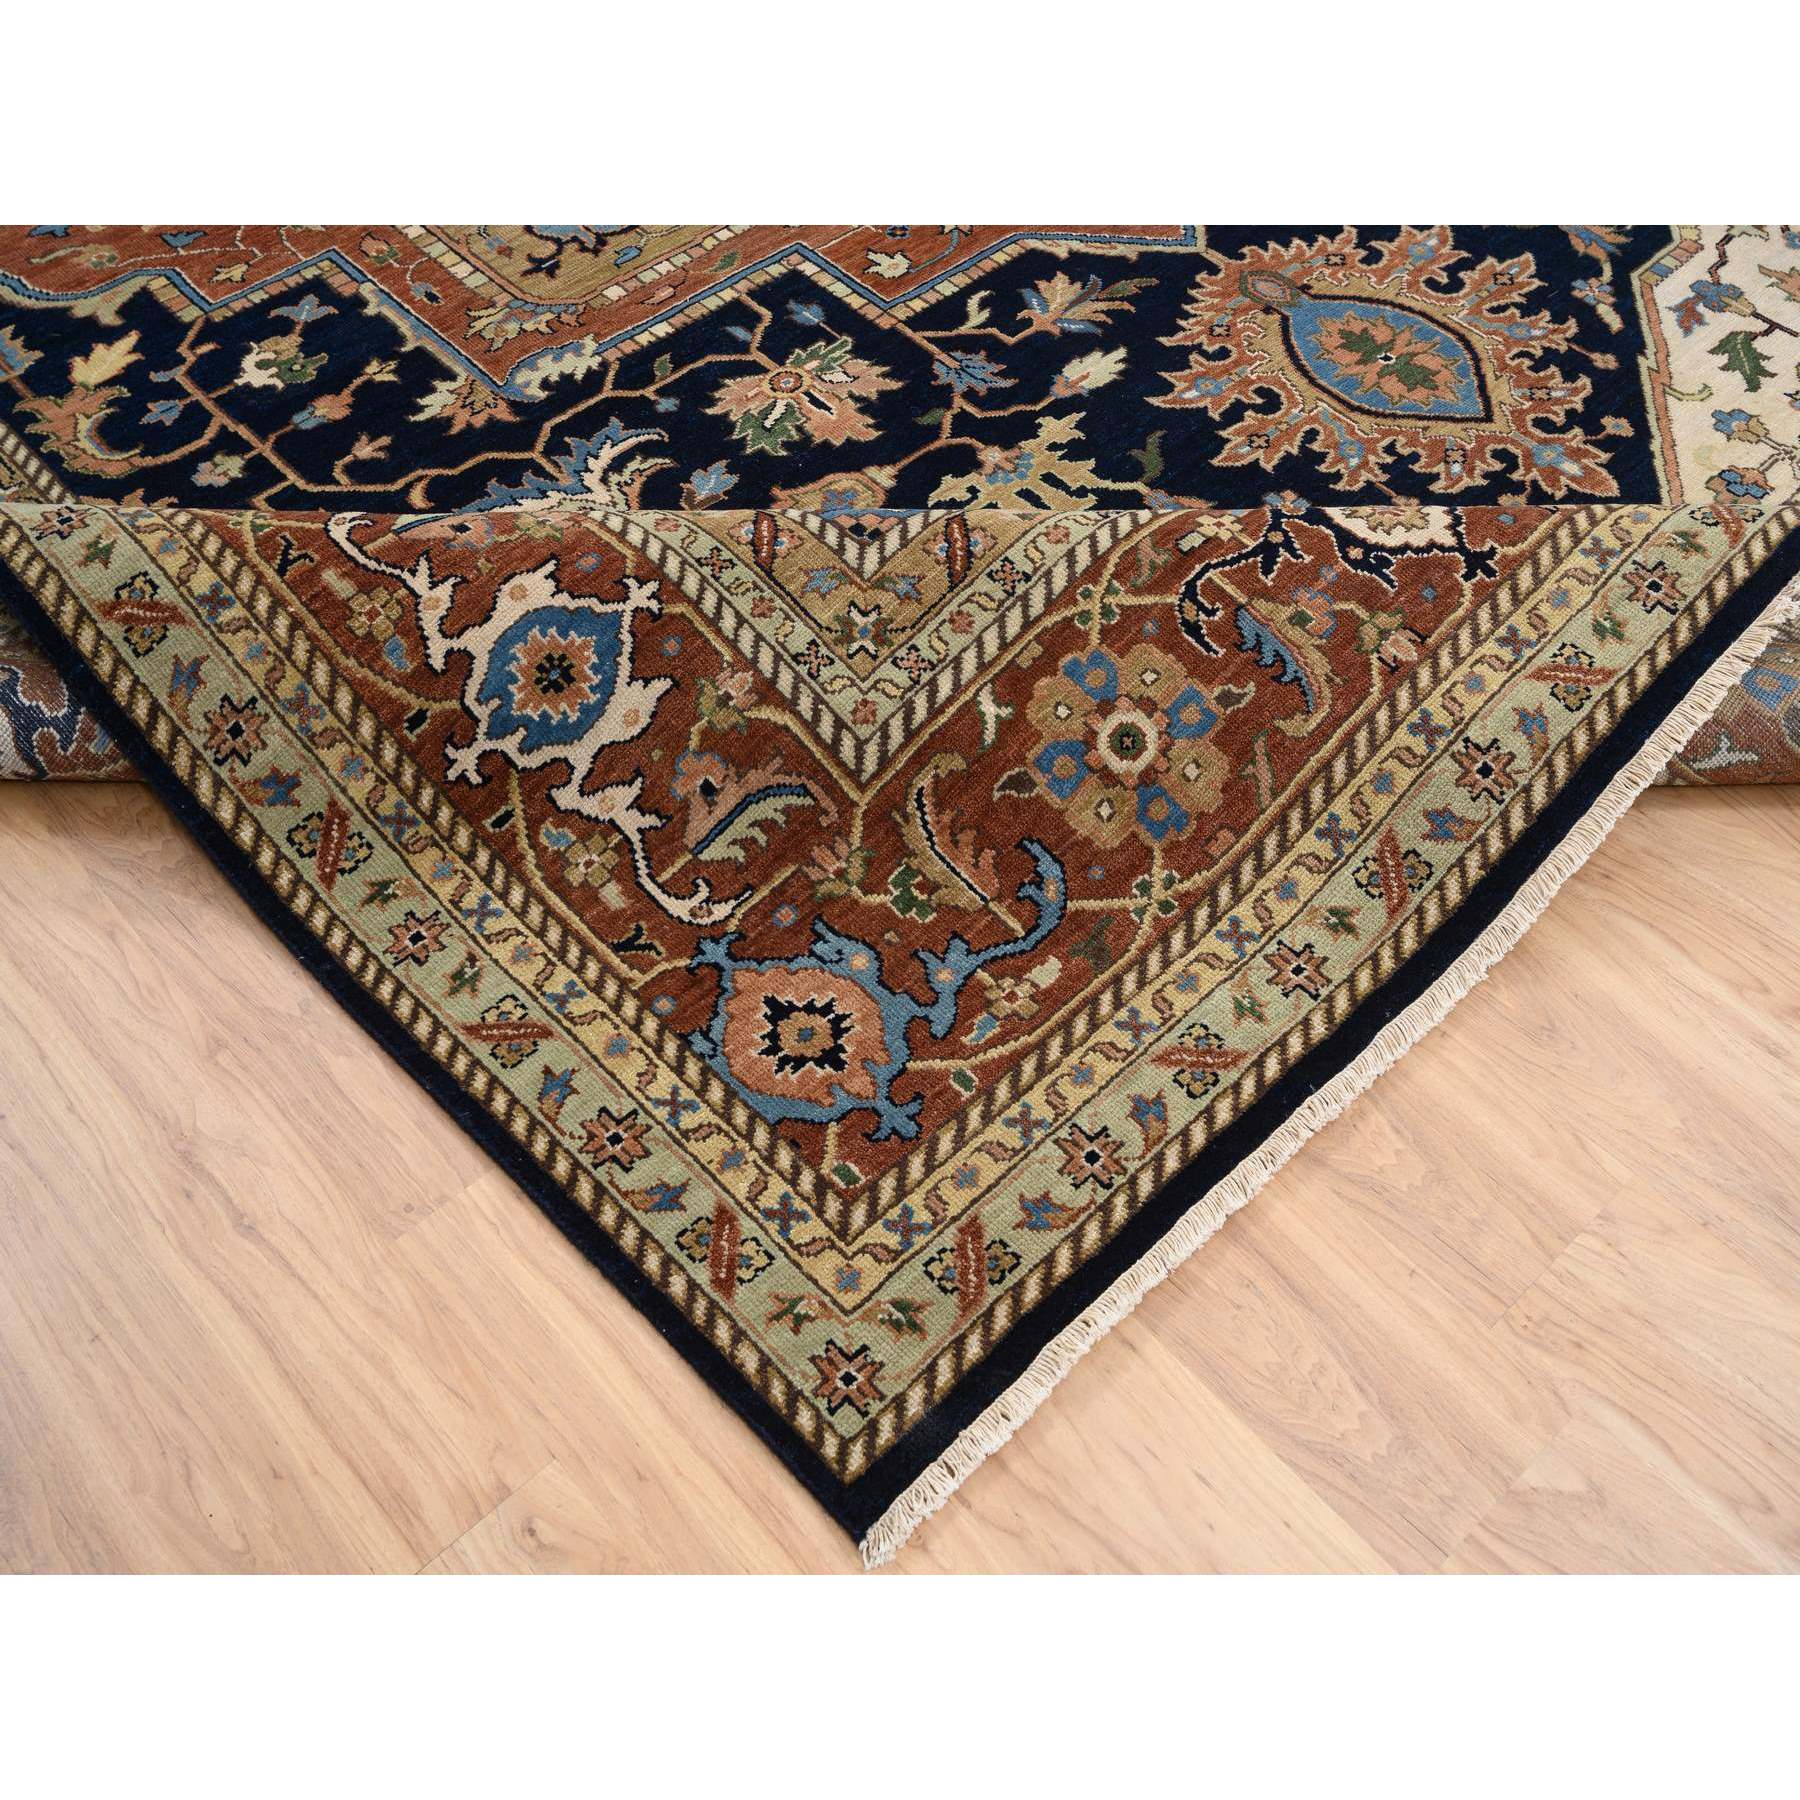 12'x15'4" Navy and Rust, Heriz with Classic Geometric Medallion Design, Thick and Plush Pure Wool Hand Woven, Oversized Oriental Rug 